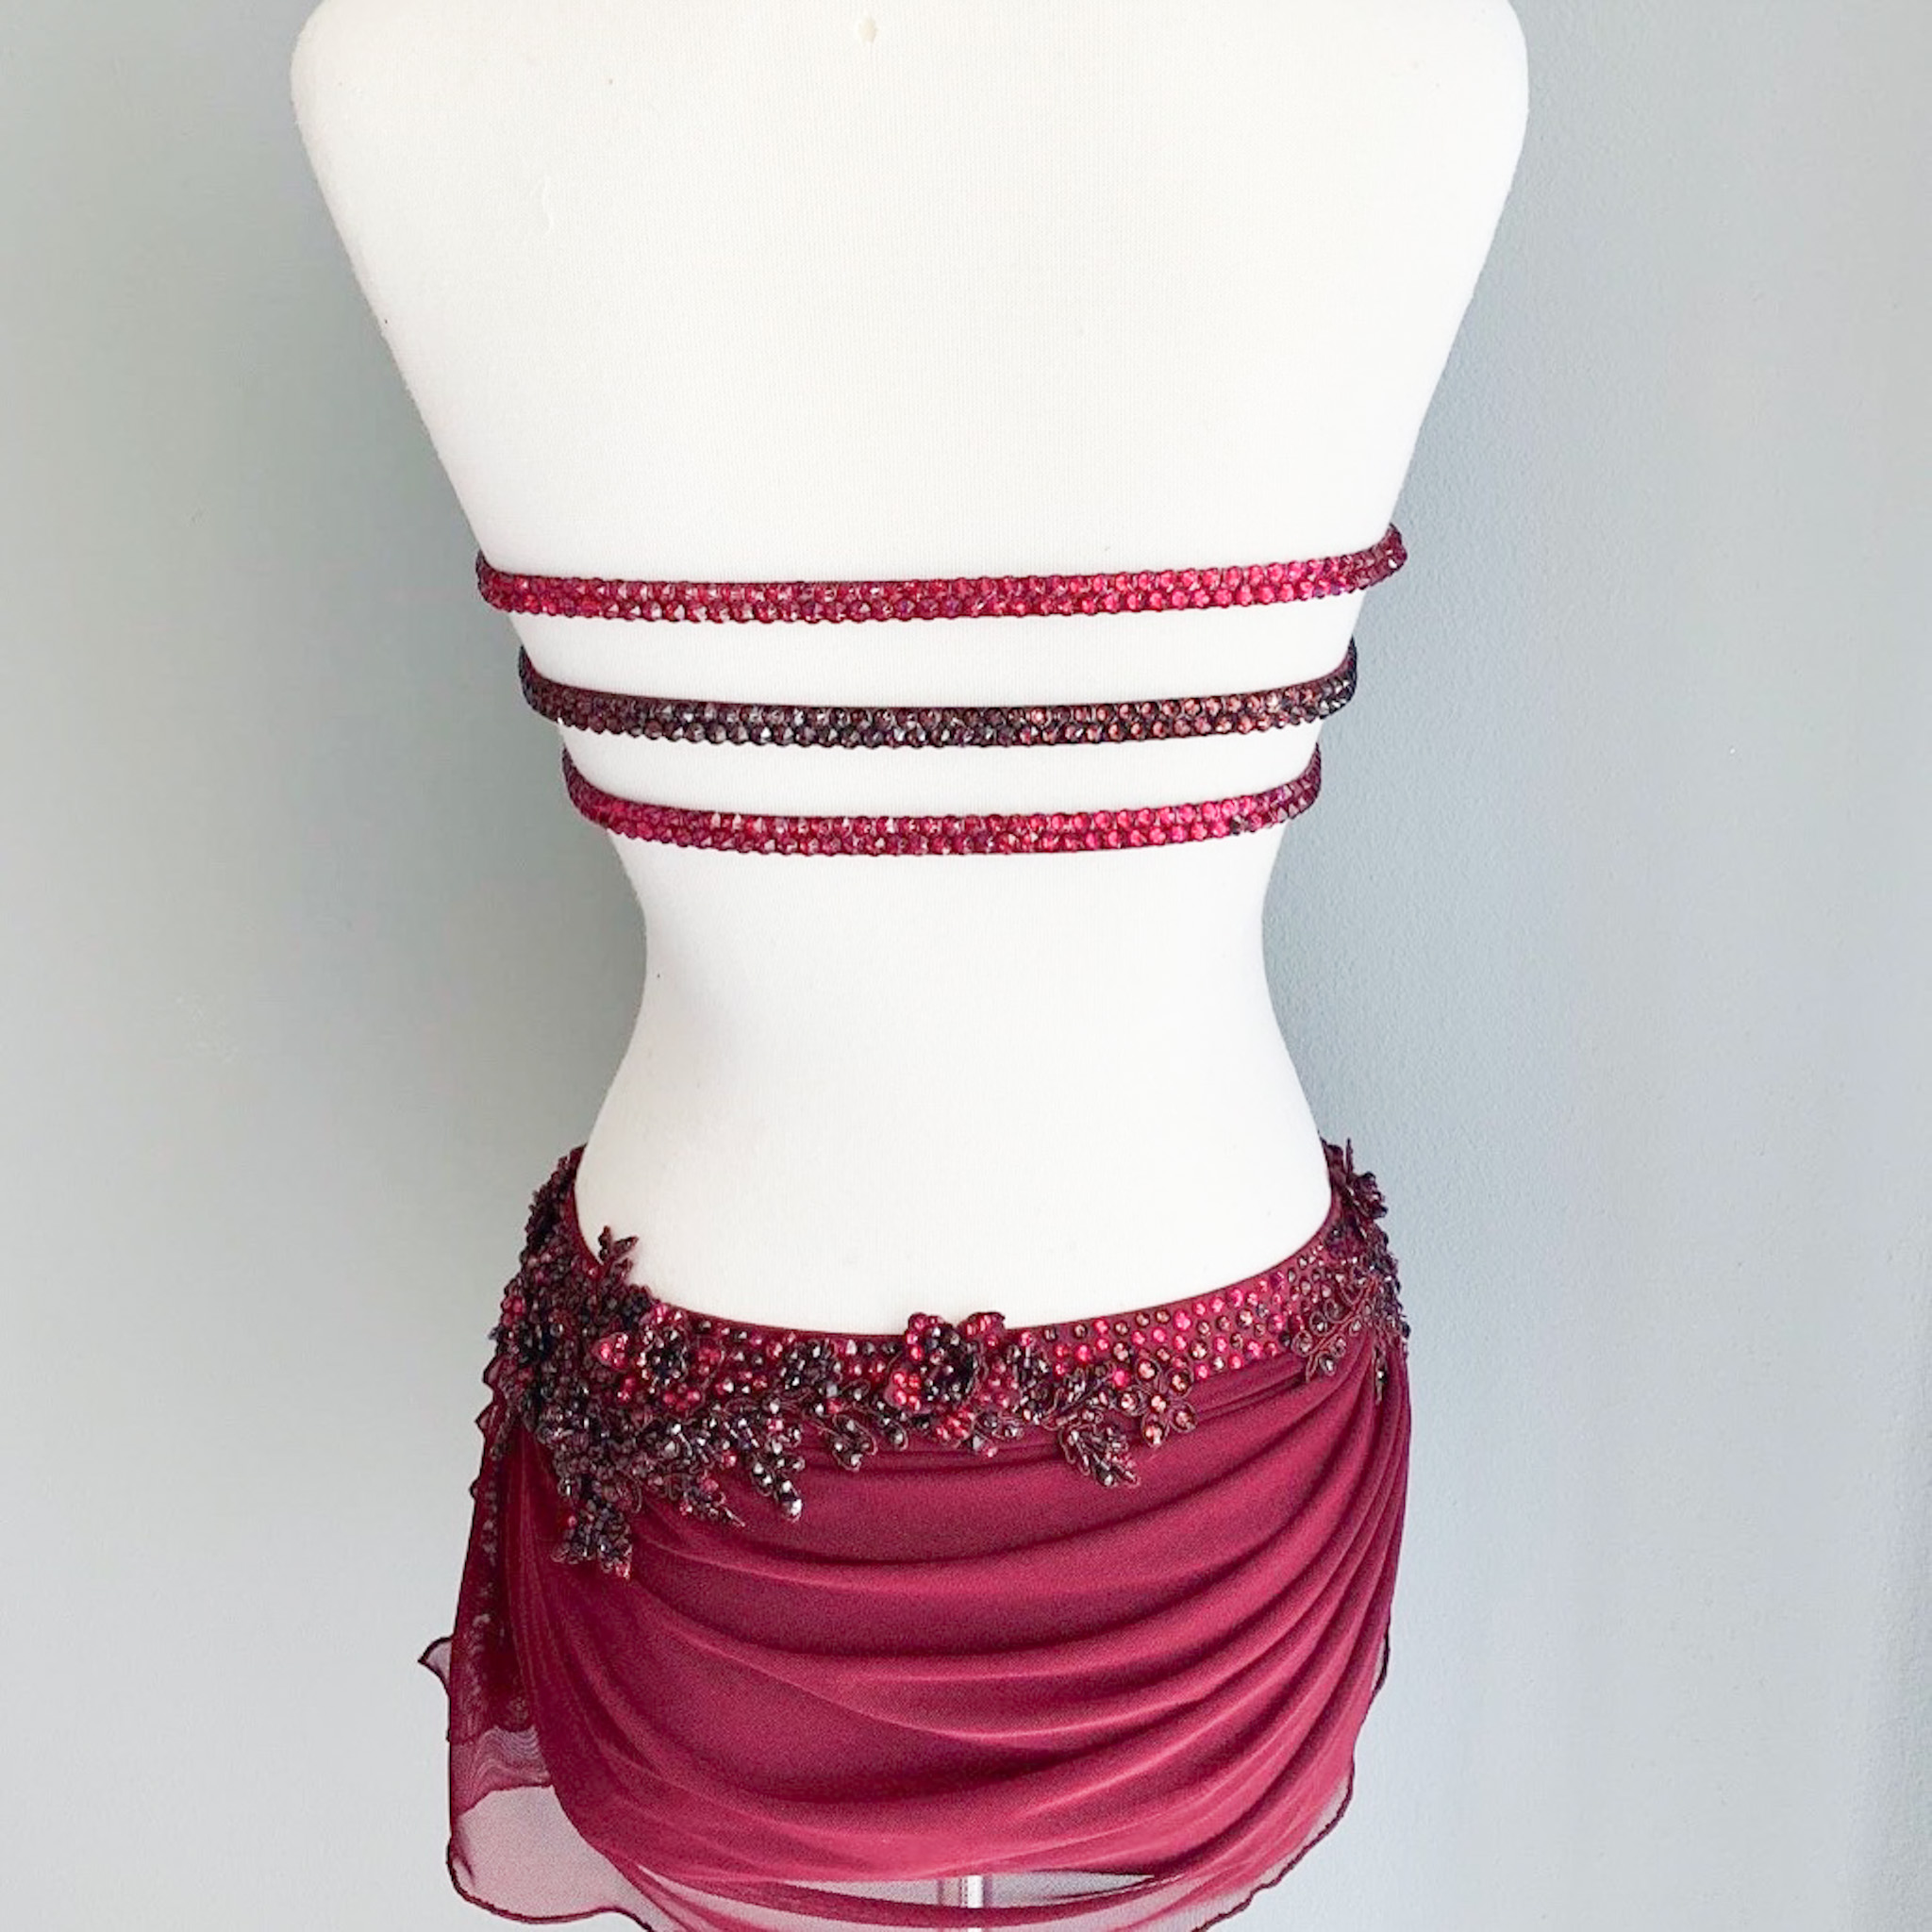 To Die For Costumes burgundy